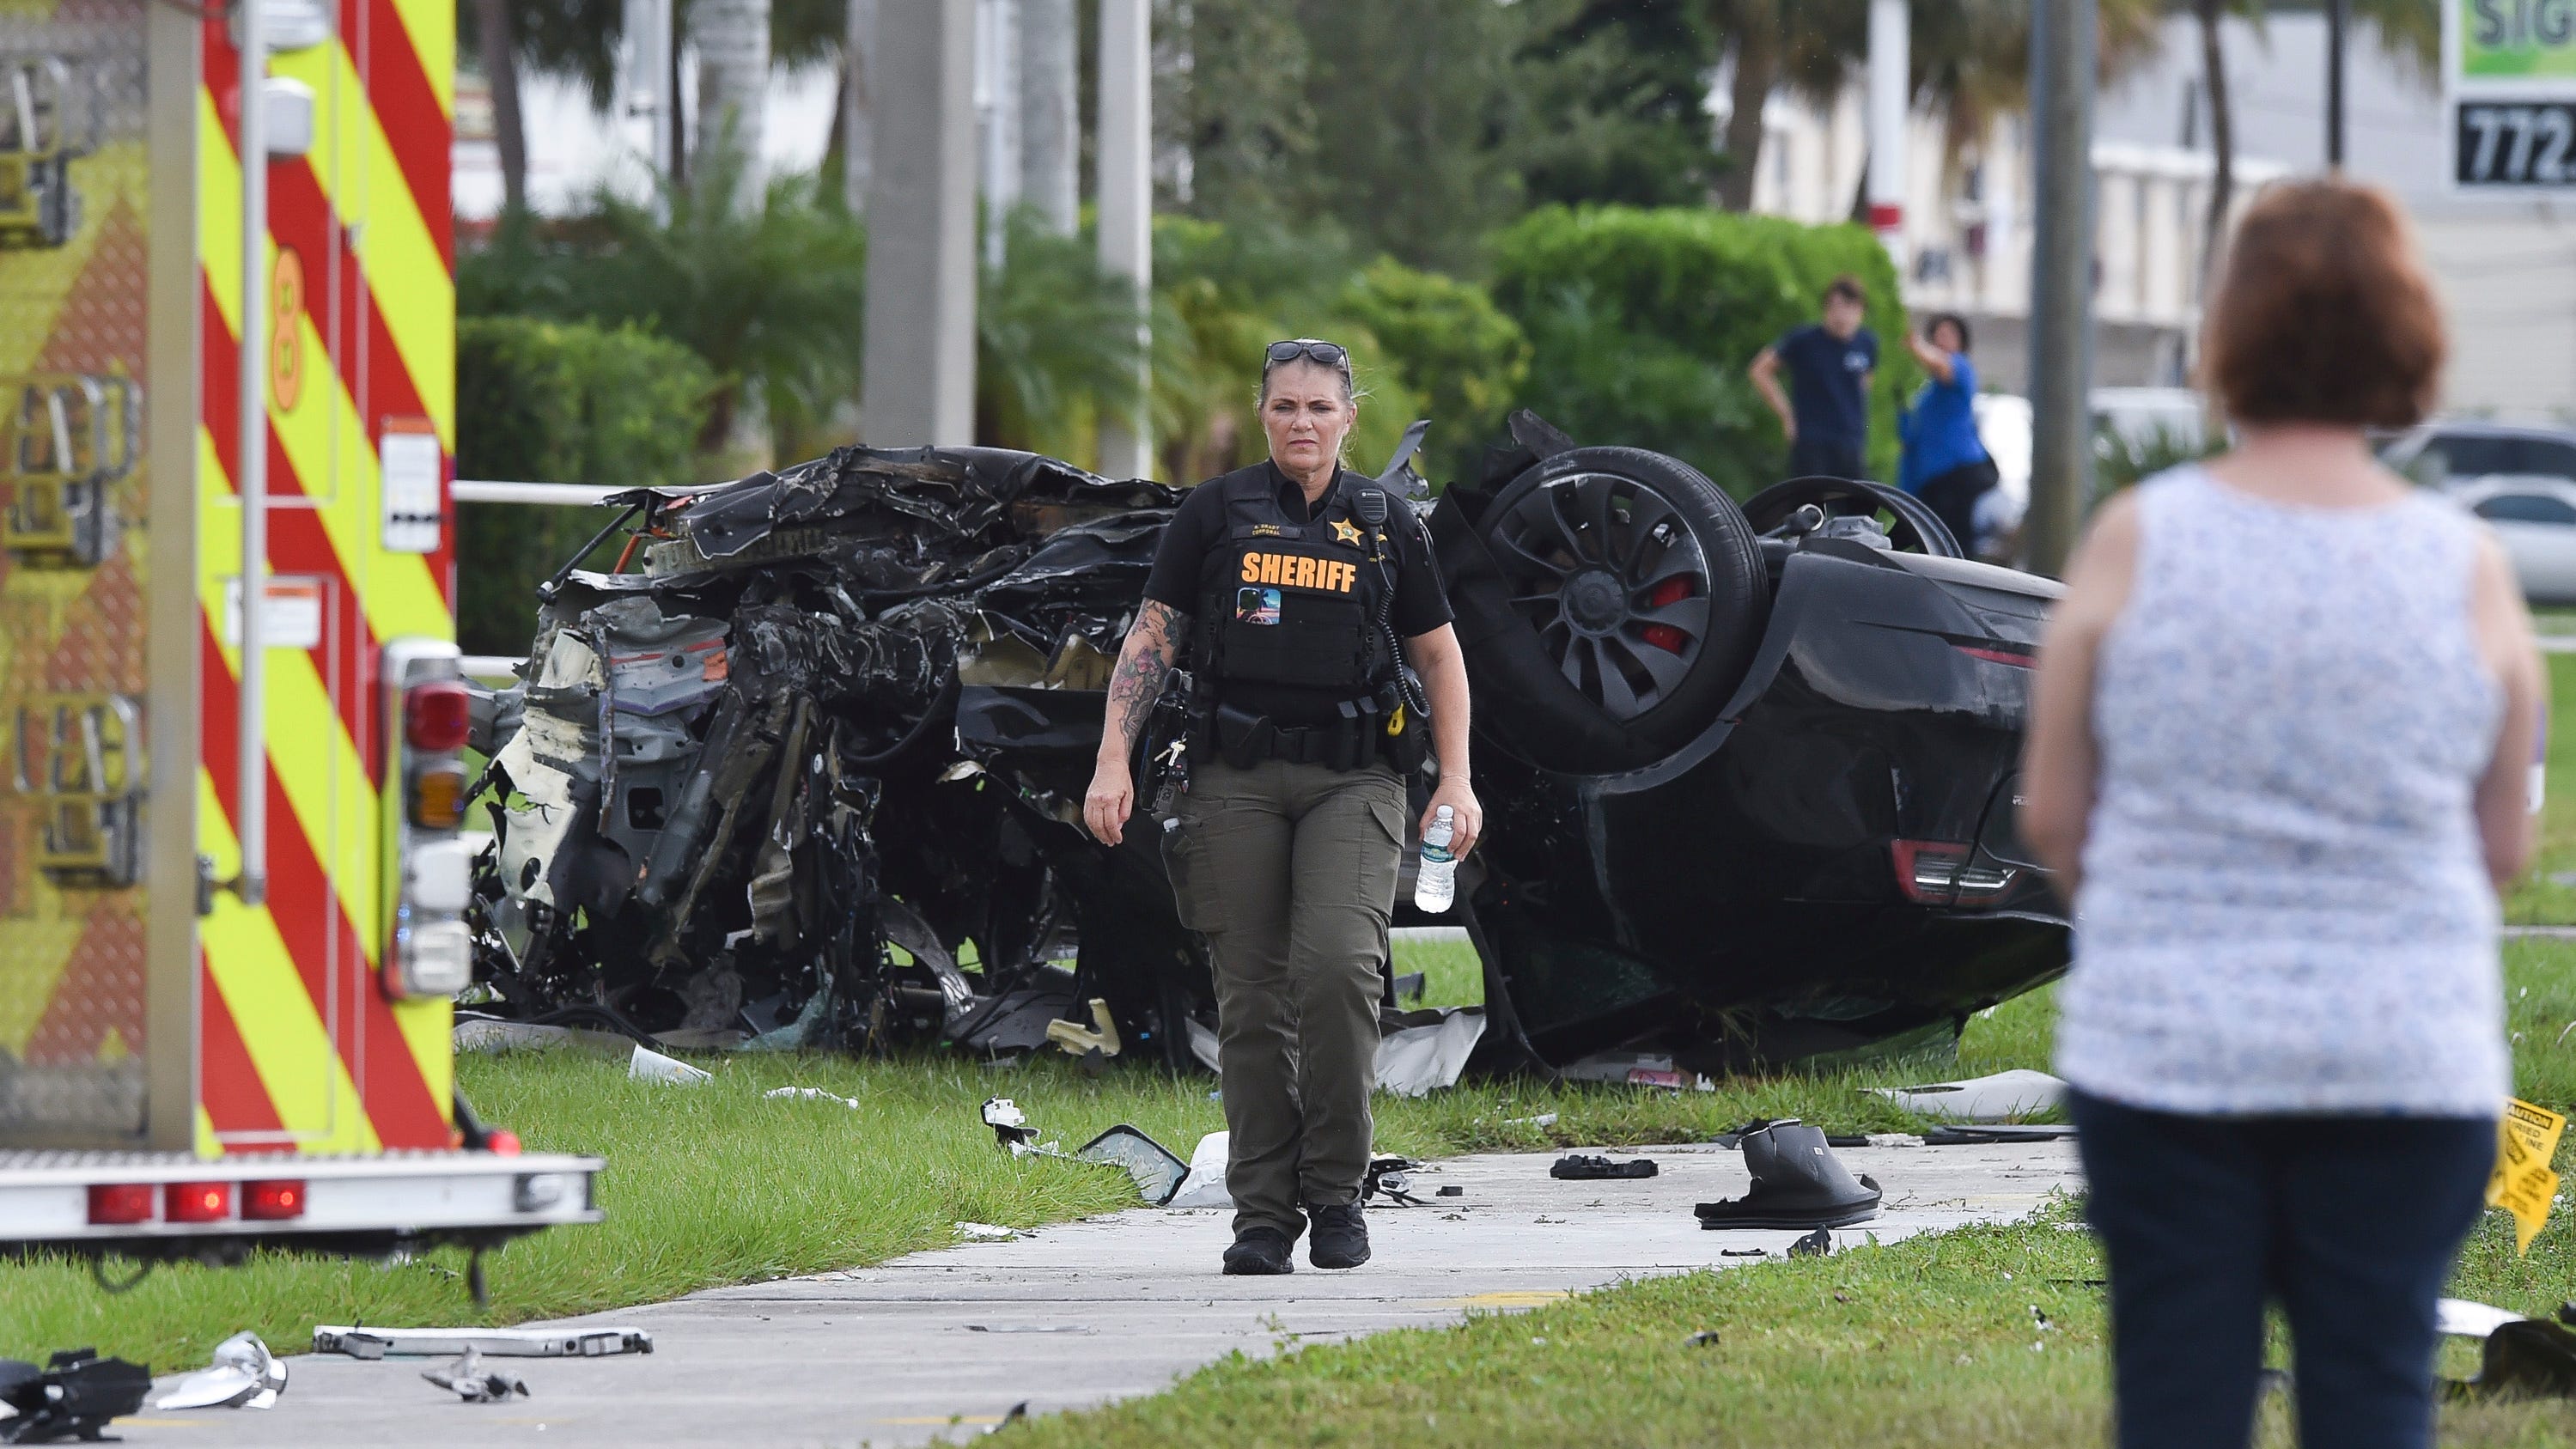 The crash is by Baker Road and U.S. 1 in Martin County